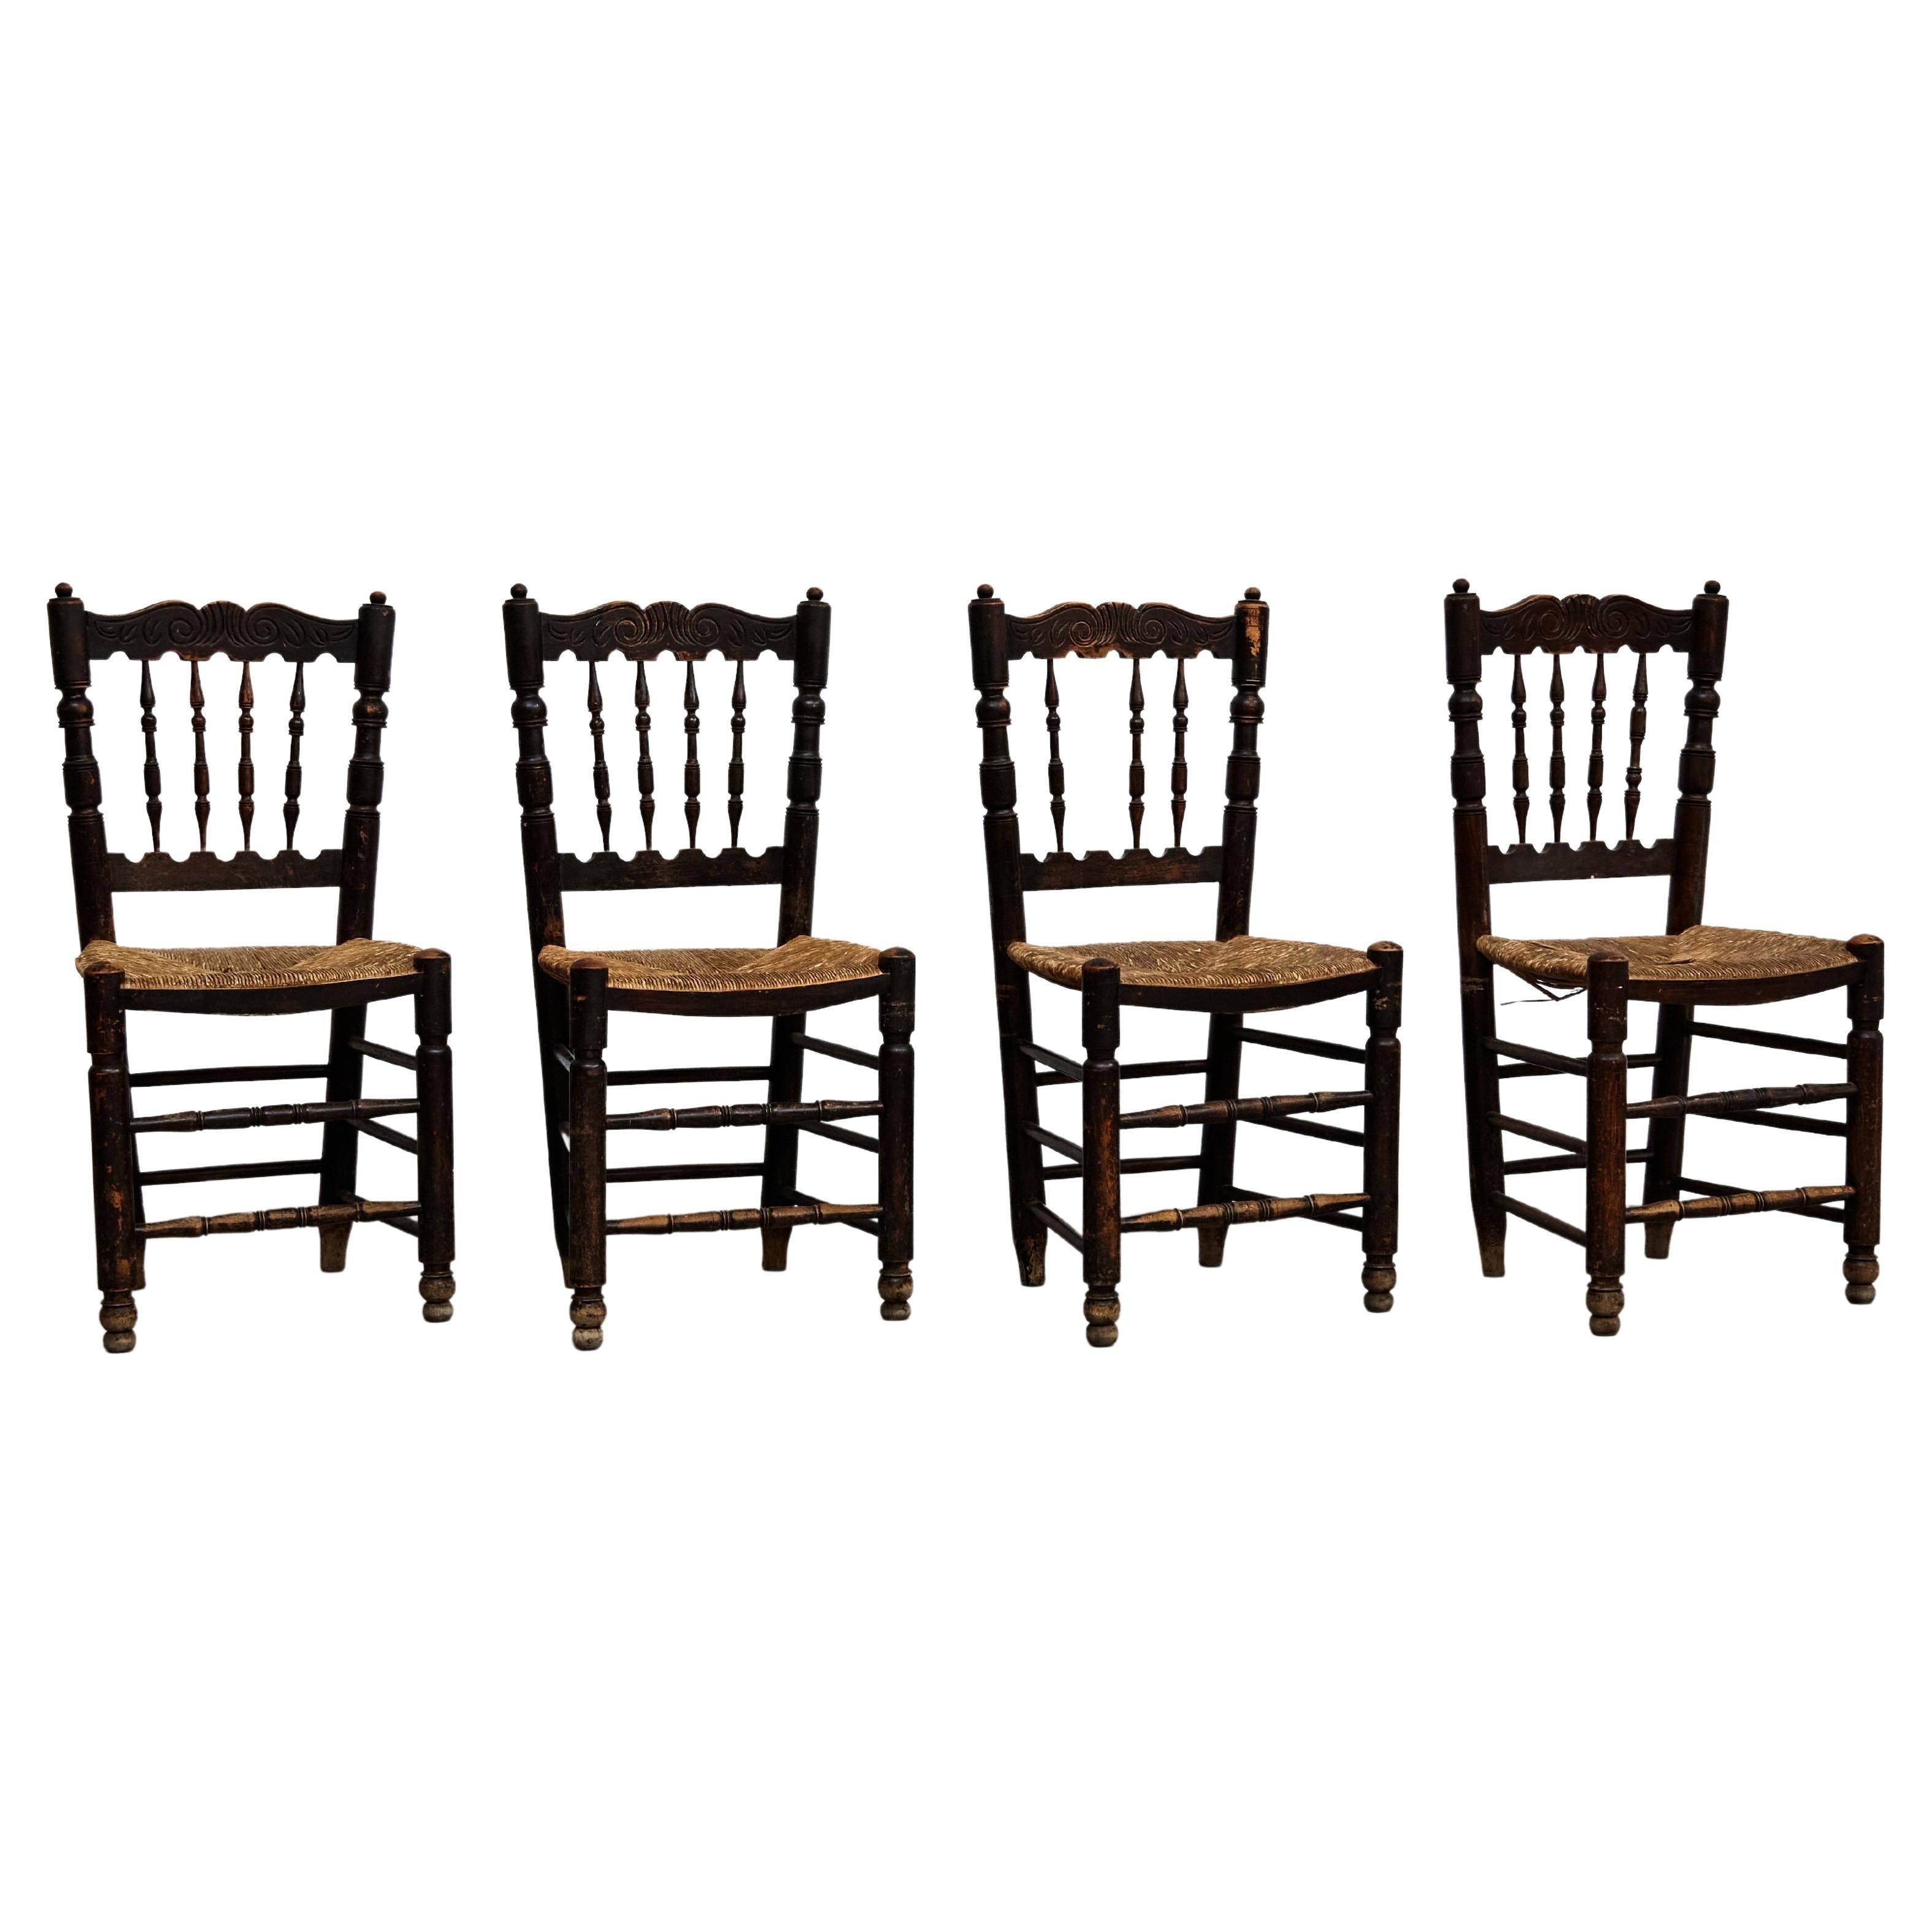 Set of Four Rustic Wood French Chairs, circa 1950 For Sale 13